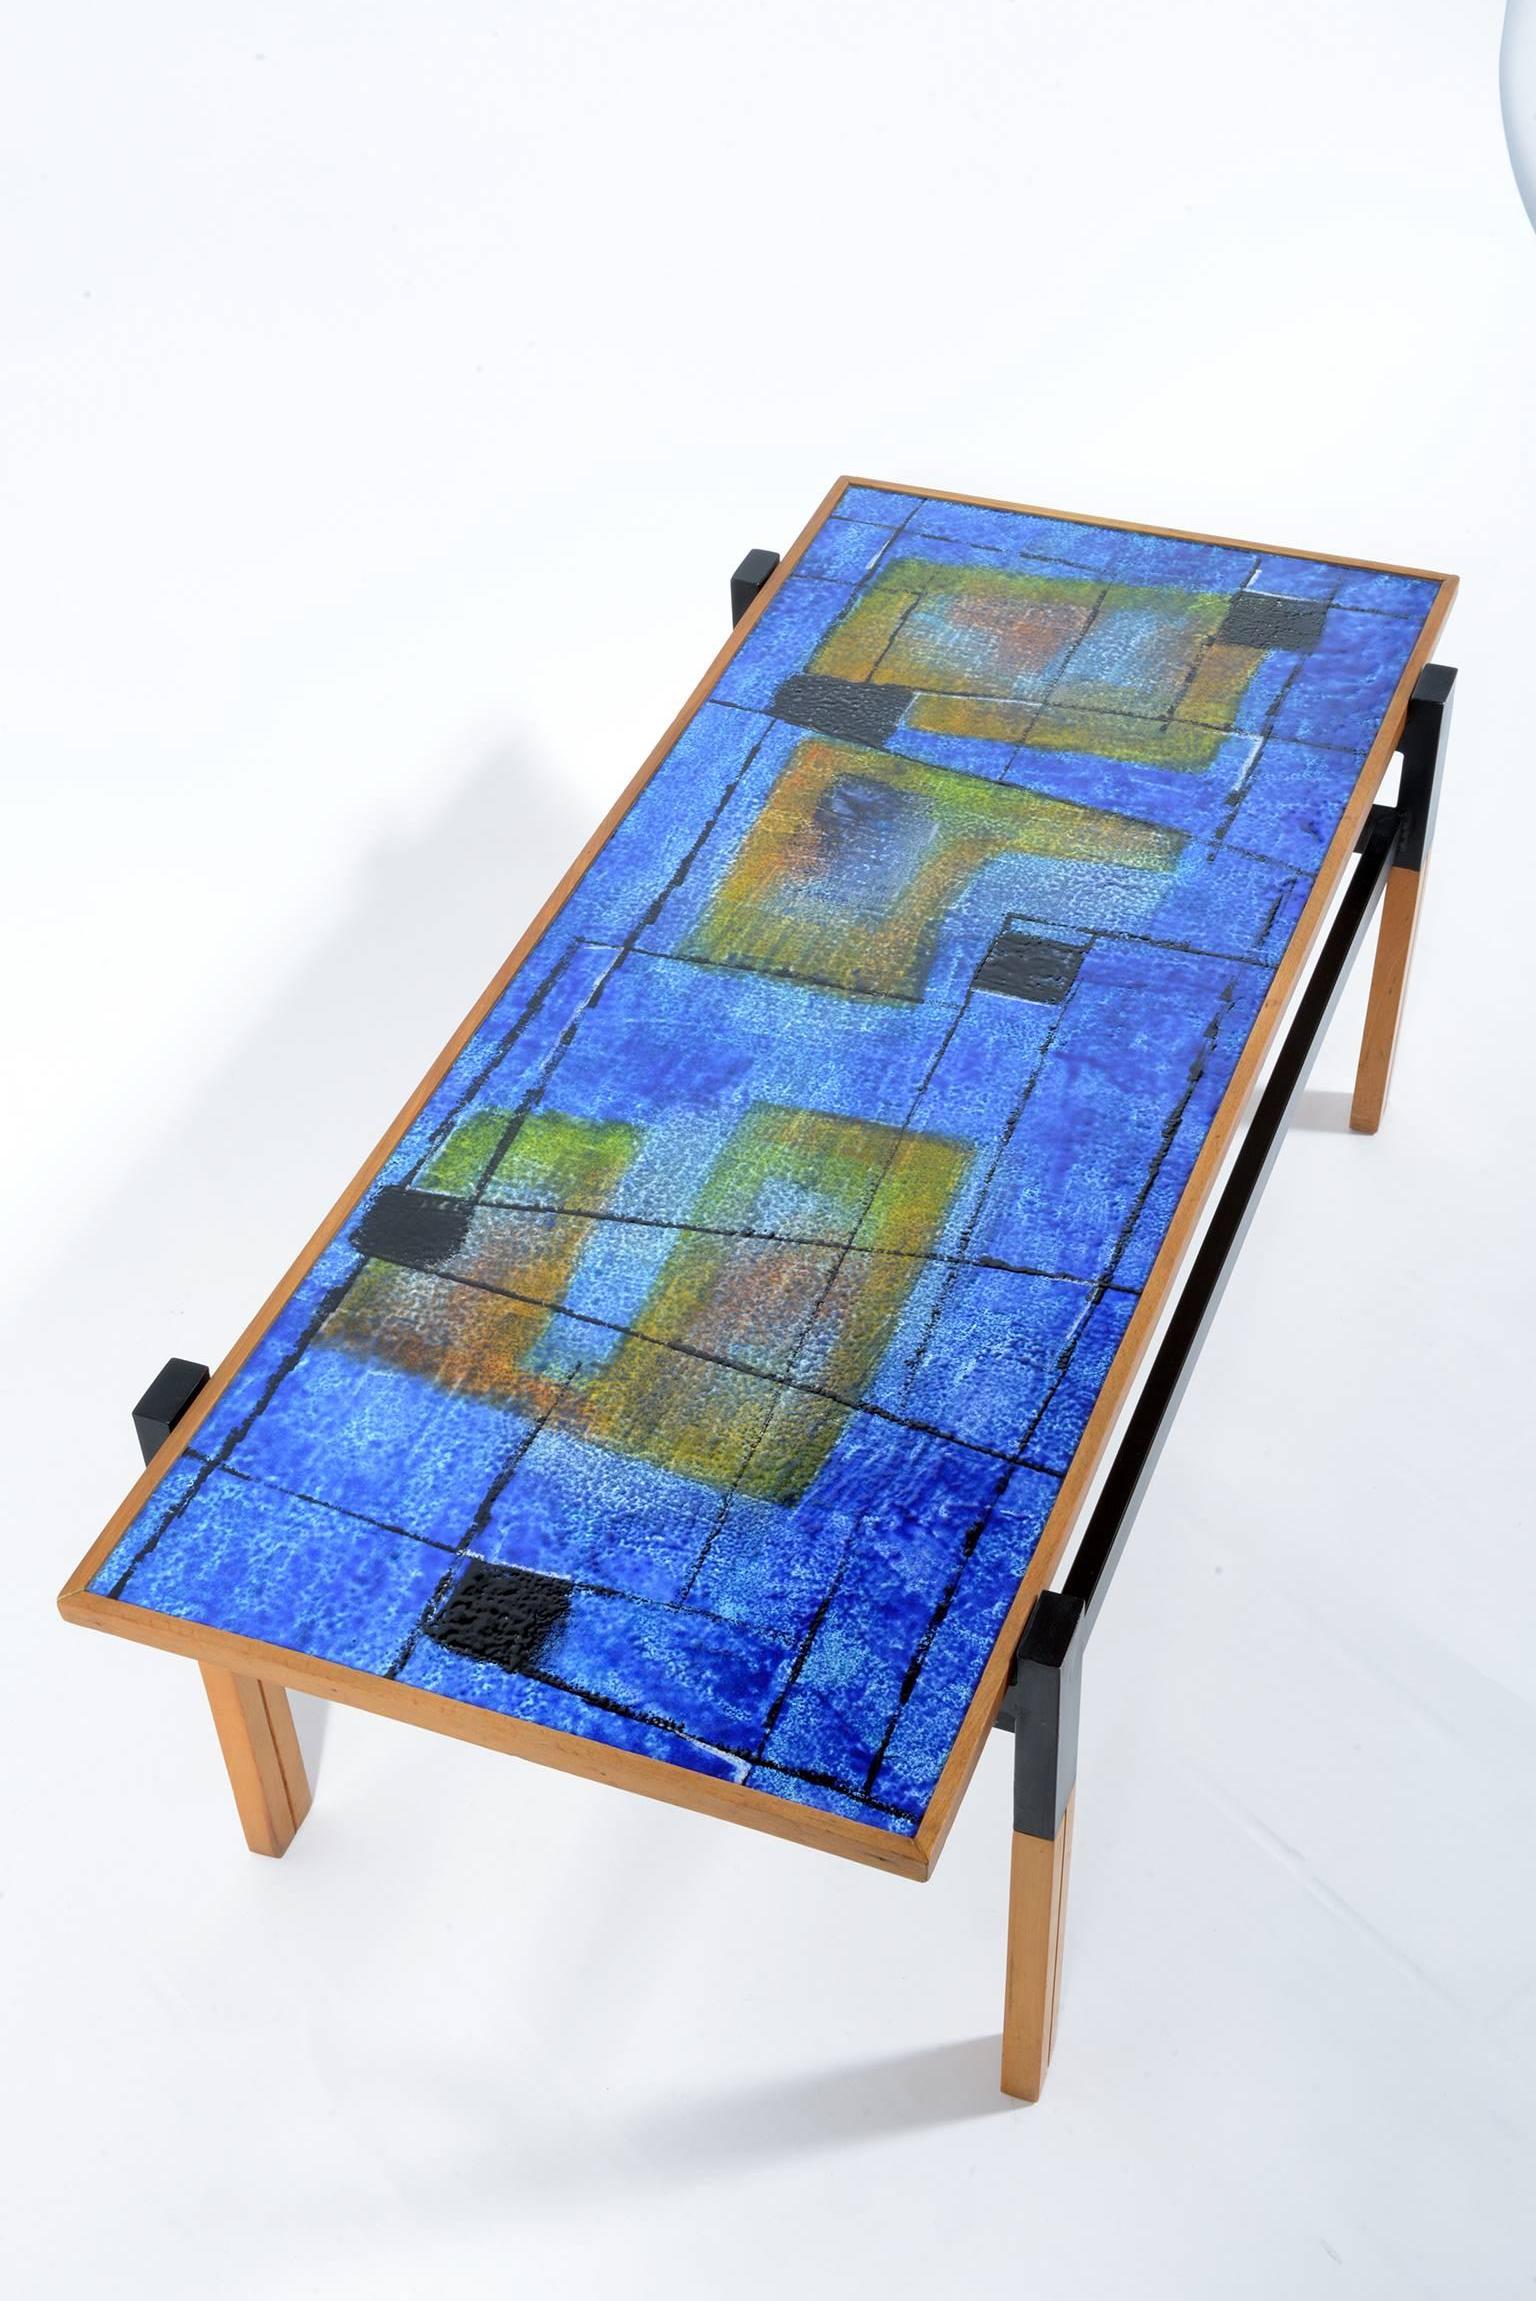  Mid Century  SIVA Poggibonsi - Siena - Italy Wood solid teak structure and enamelled copper with abstract decoration coffee table.